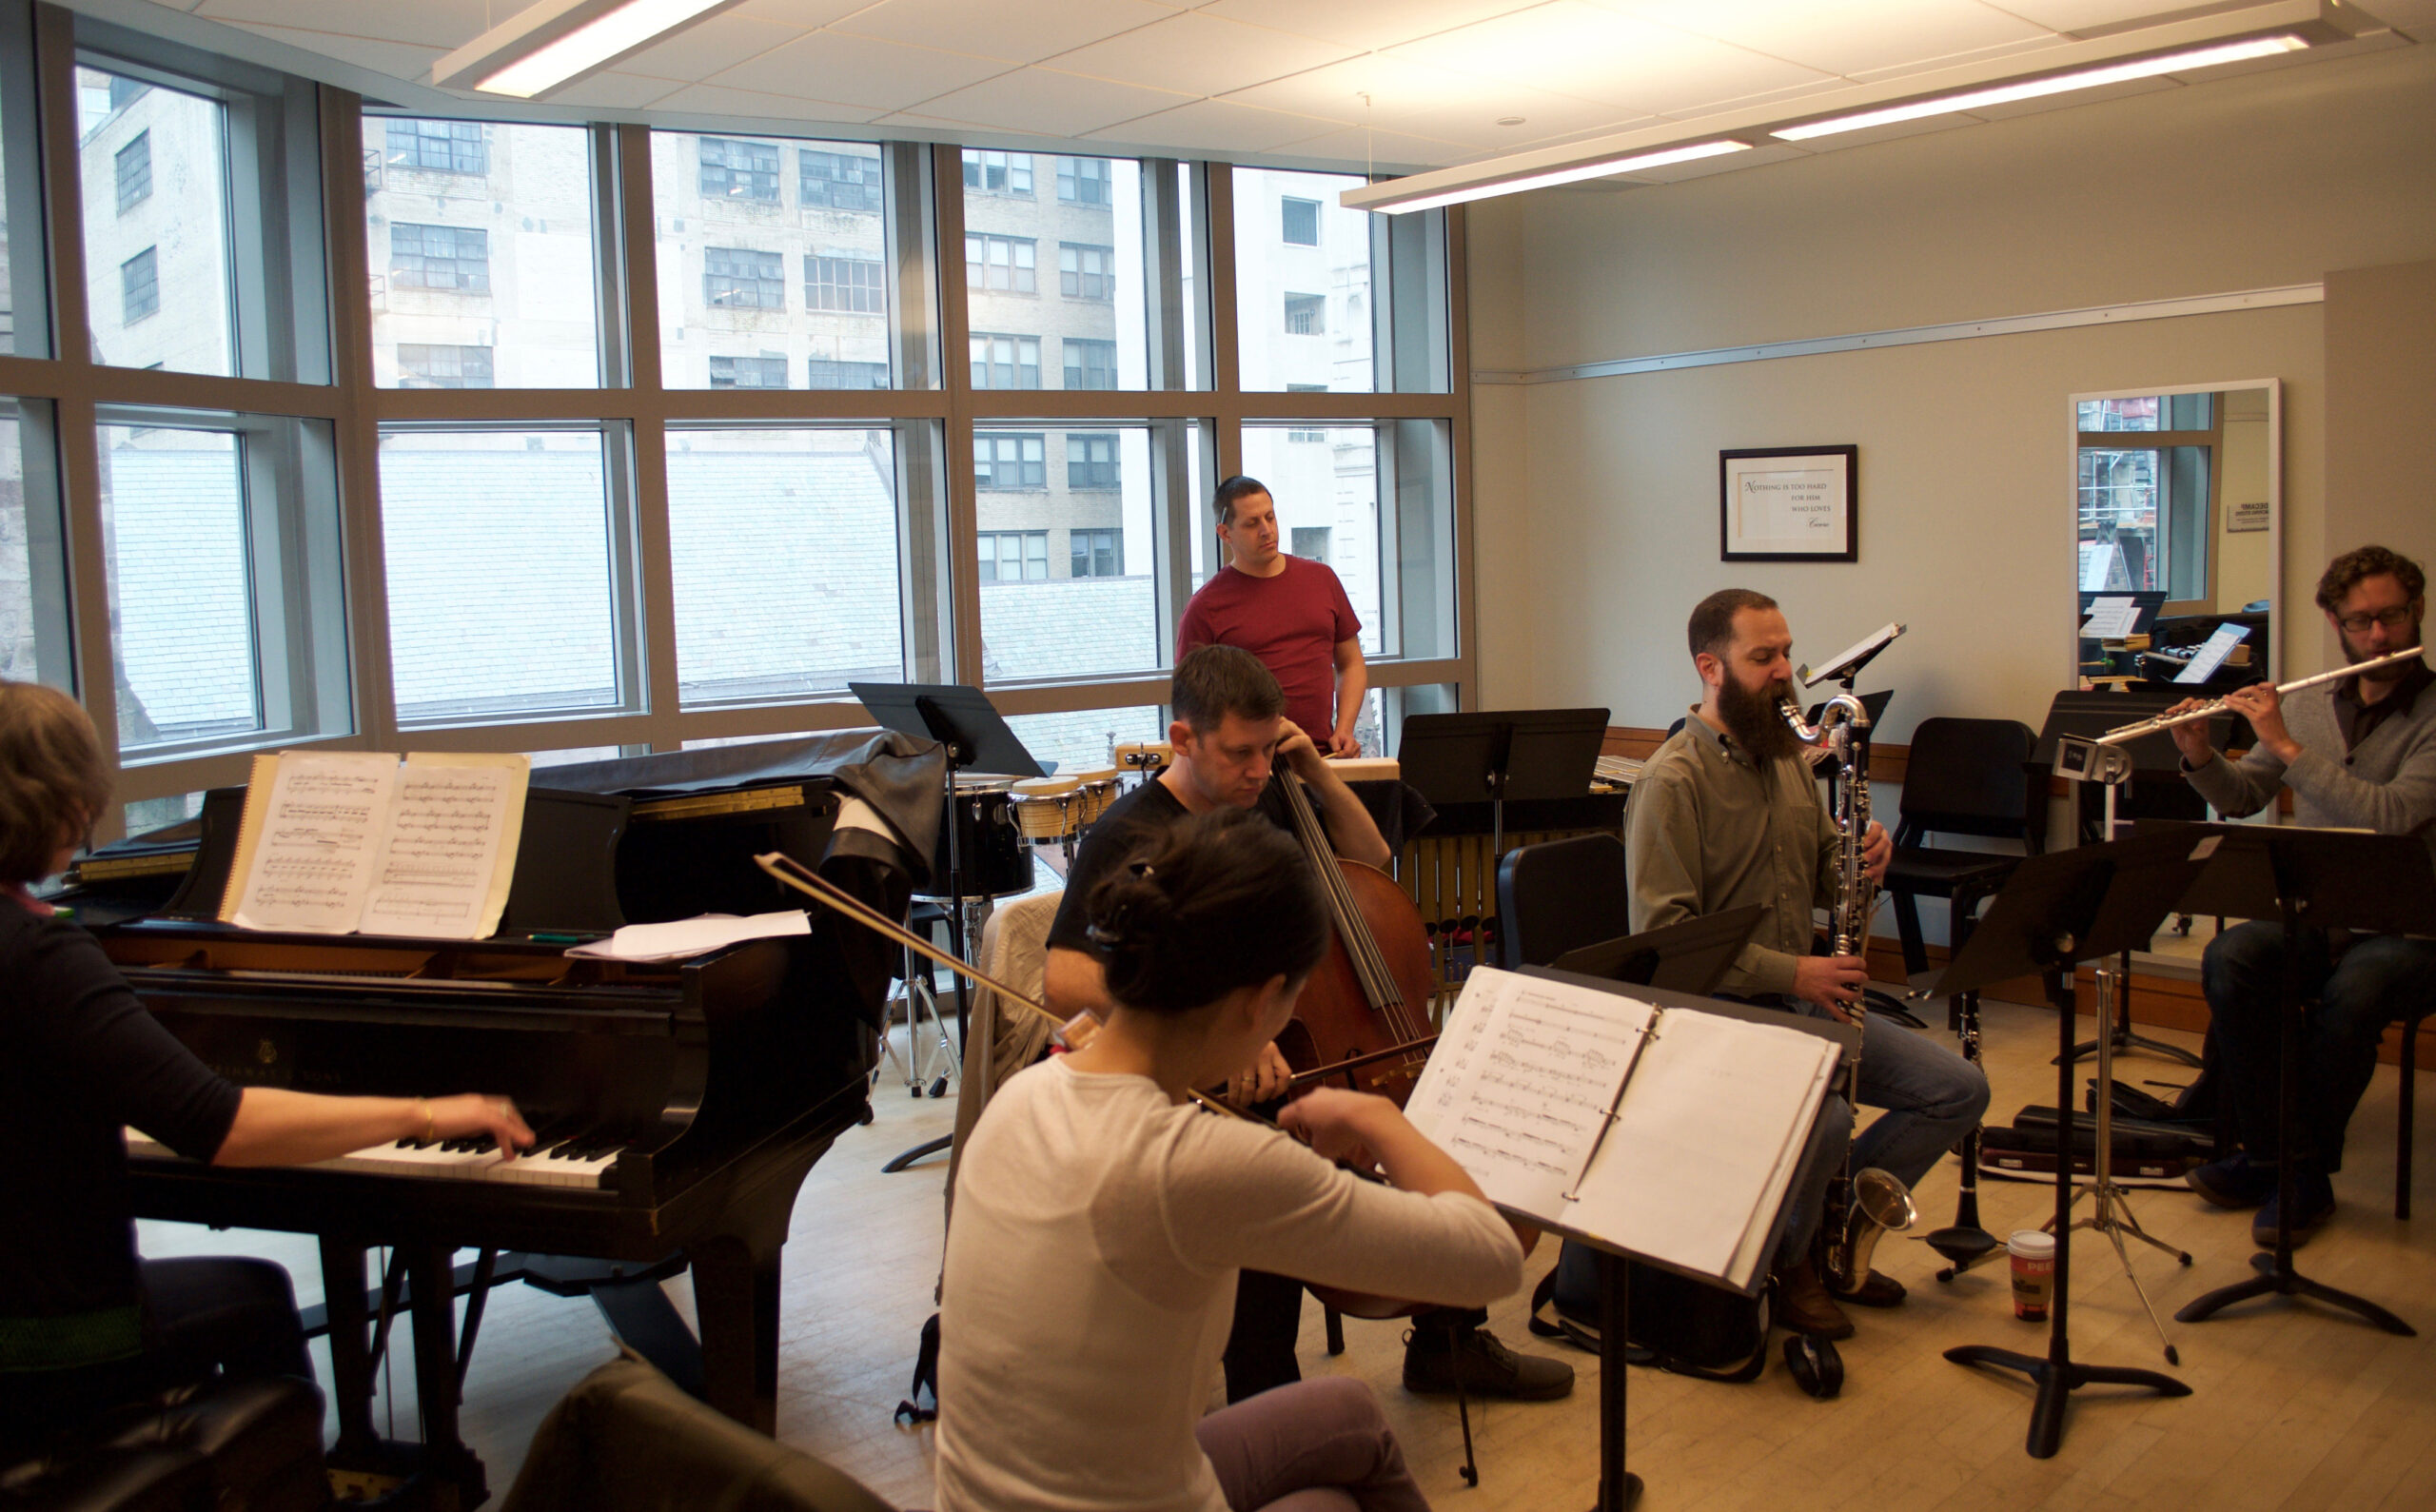 Eighth Blackbird fits in a rehearsal during their Curtis residency.